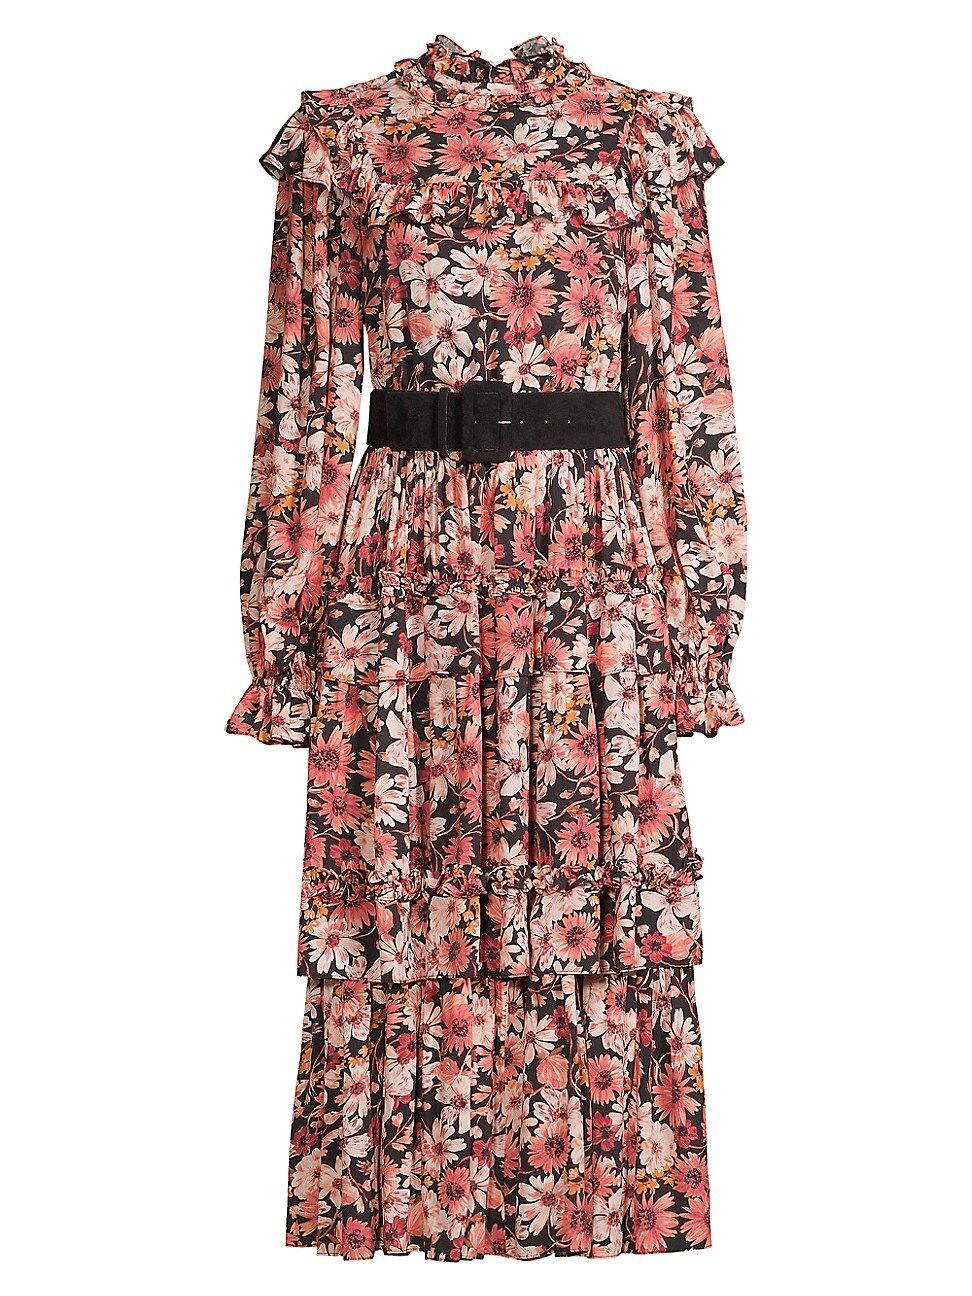 Women's Belted Tiered Floral Midi-Dress - Autumn - Size 4 | Saks Fifth Avenue